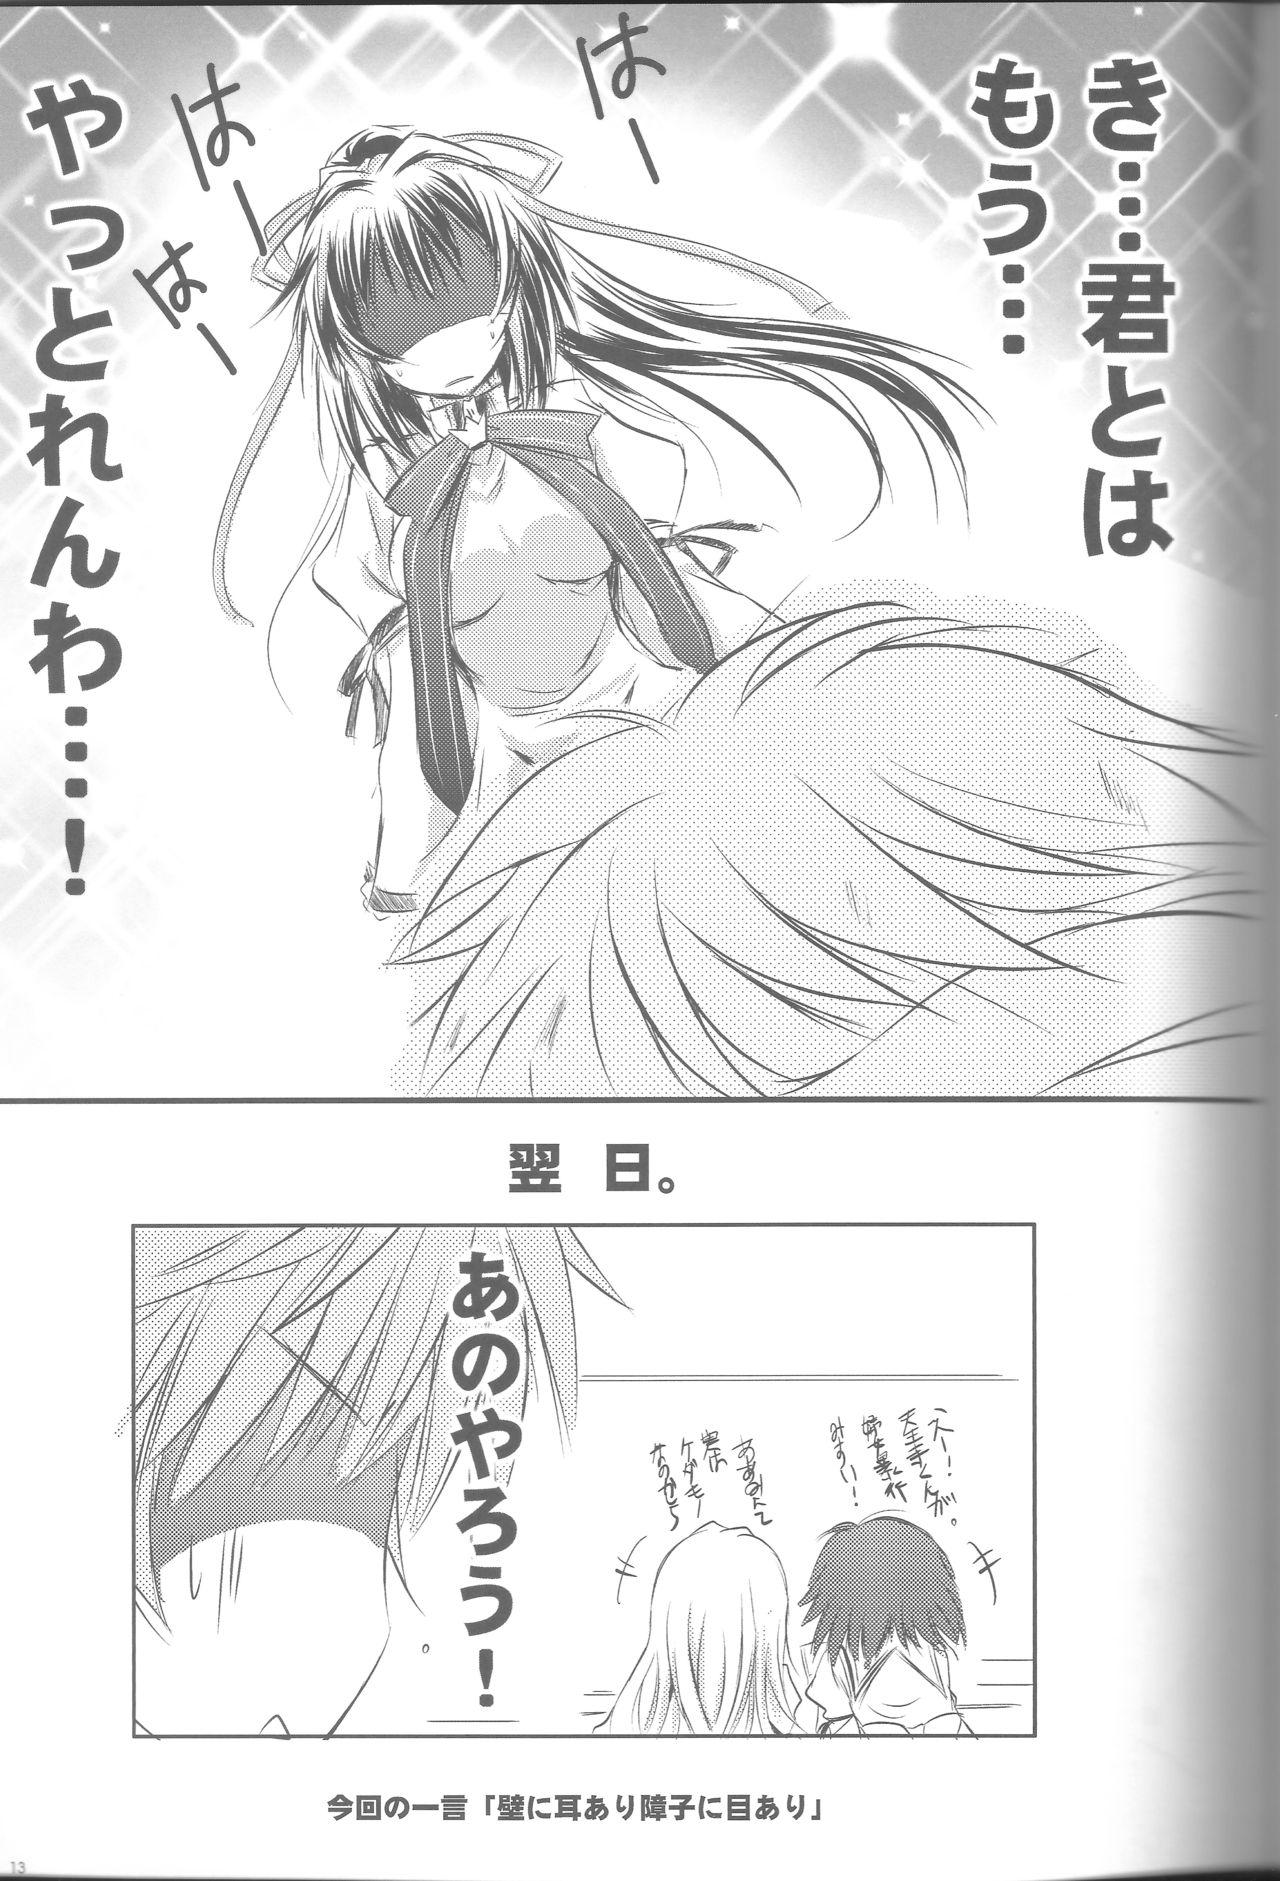 Top VISION Fifteen - Rewrite Livesex - Page 12